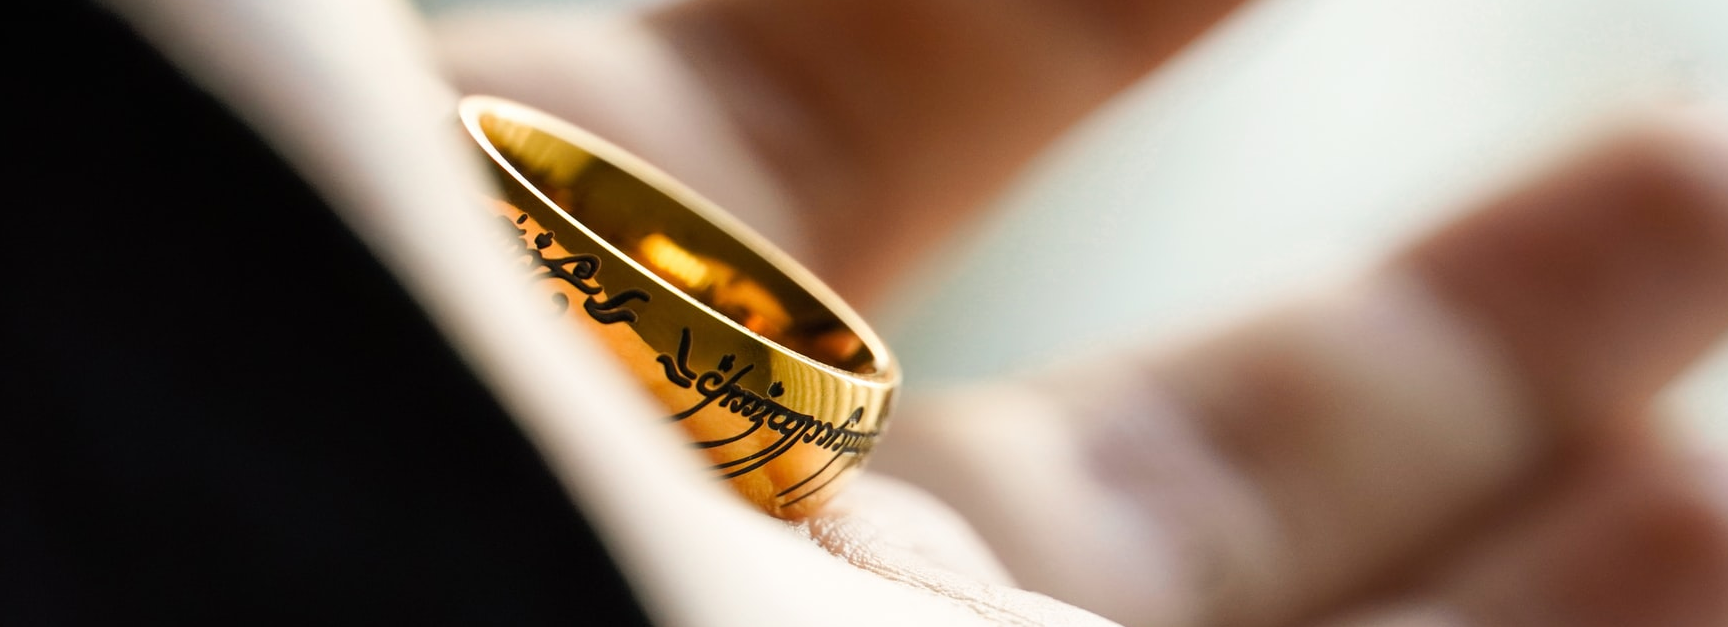 Hand holding Sauron's ring lord of the rings Christian themes